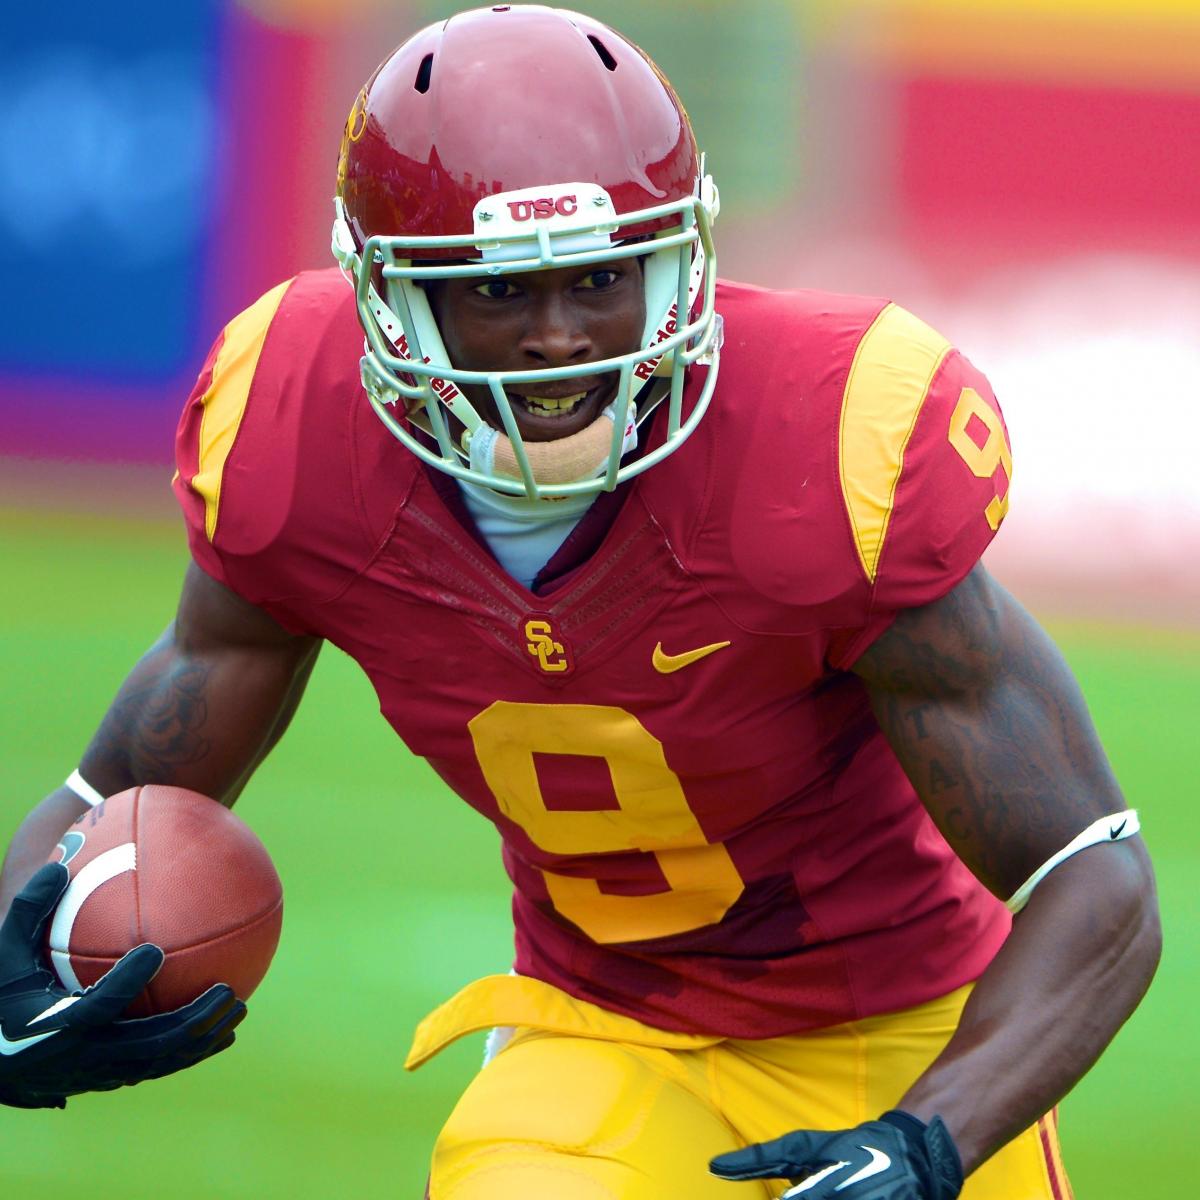 Marqise Lee Says USC Not Naming Starting Quarterback is 'Crazy' | News ...